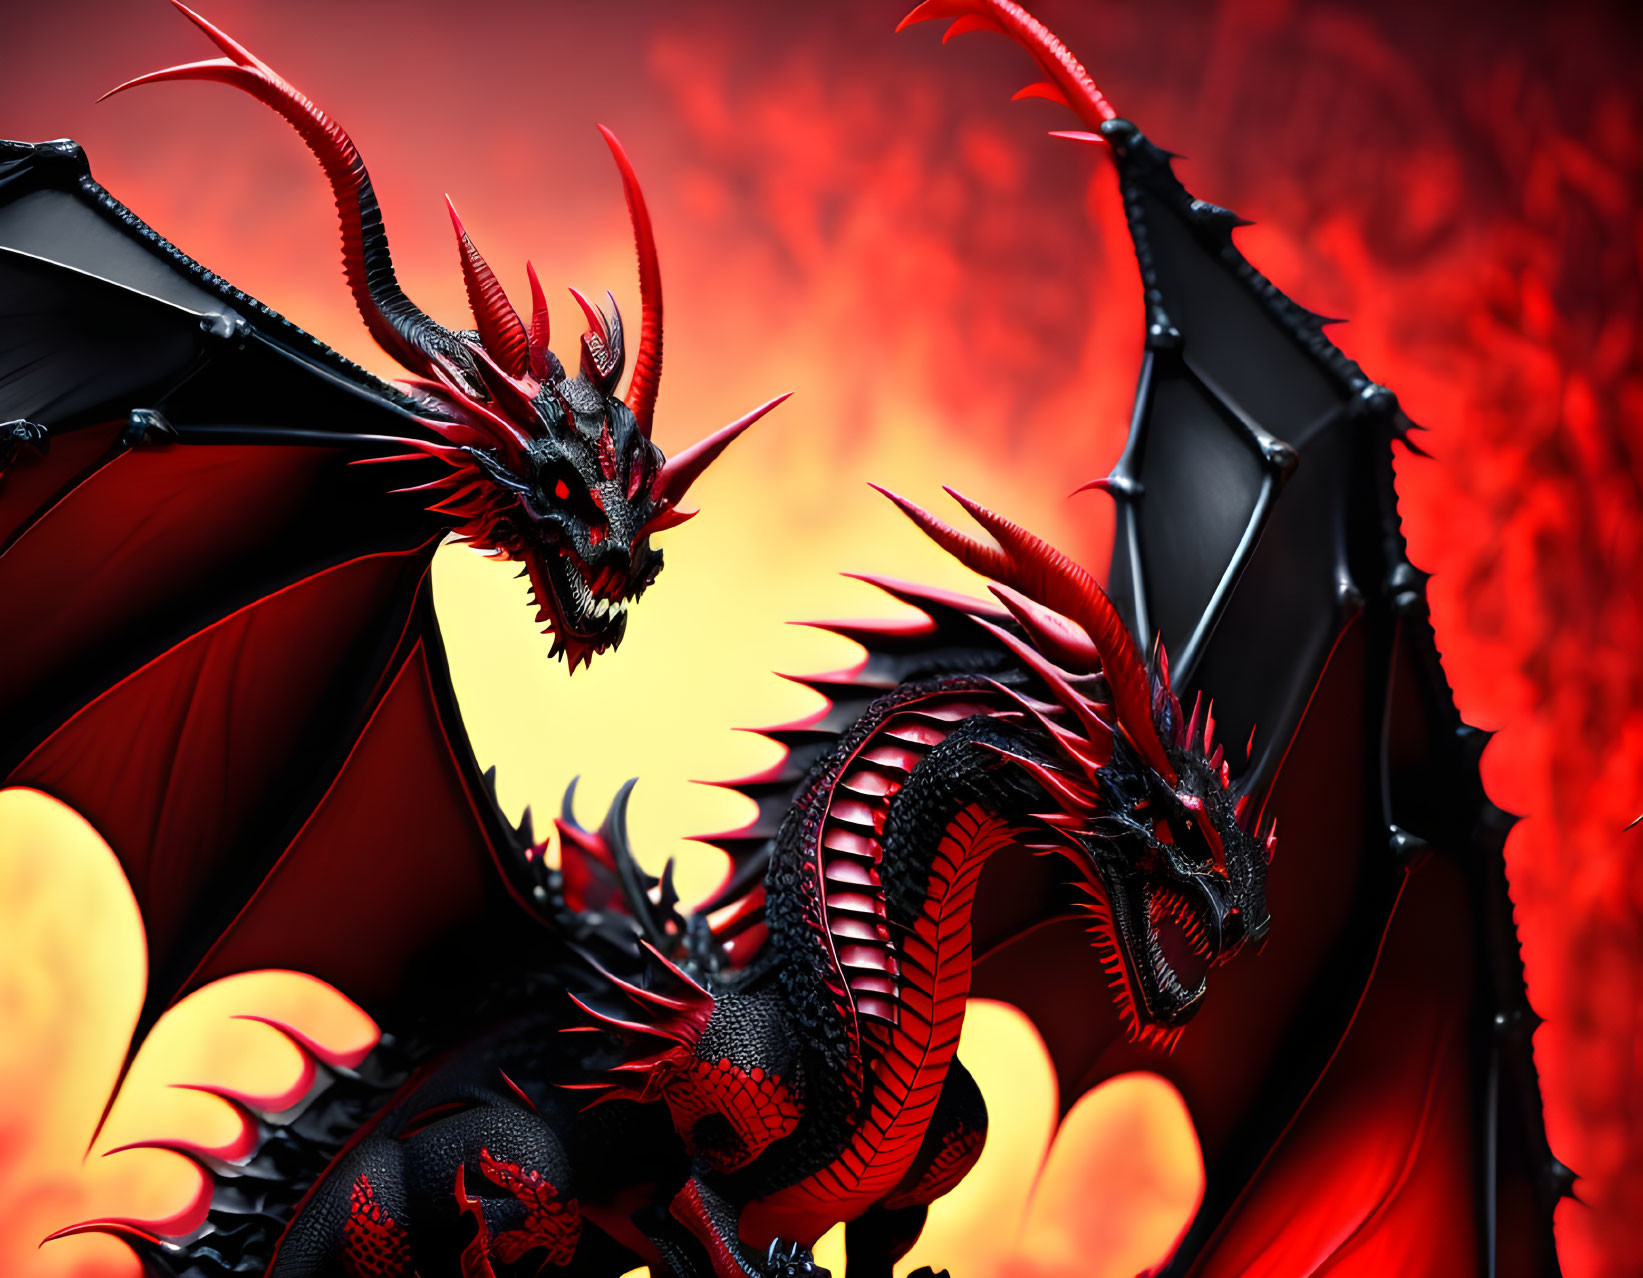 Black and Red Dragons with Spread Wings on Fiery Red Background